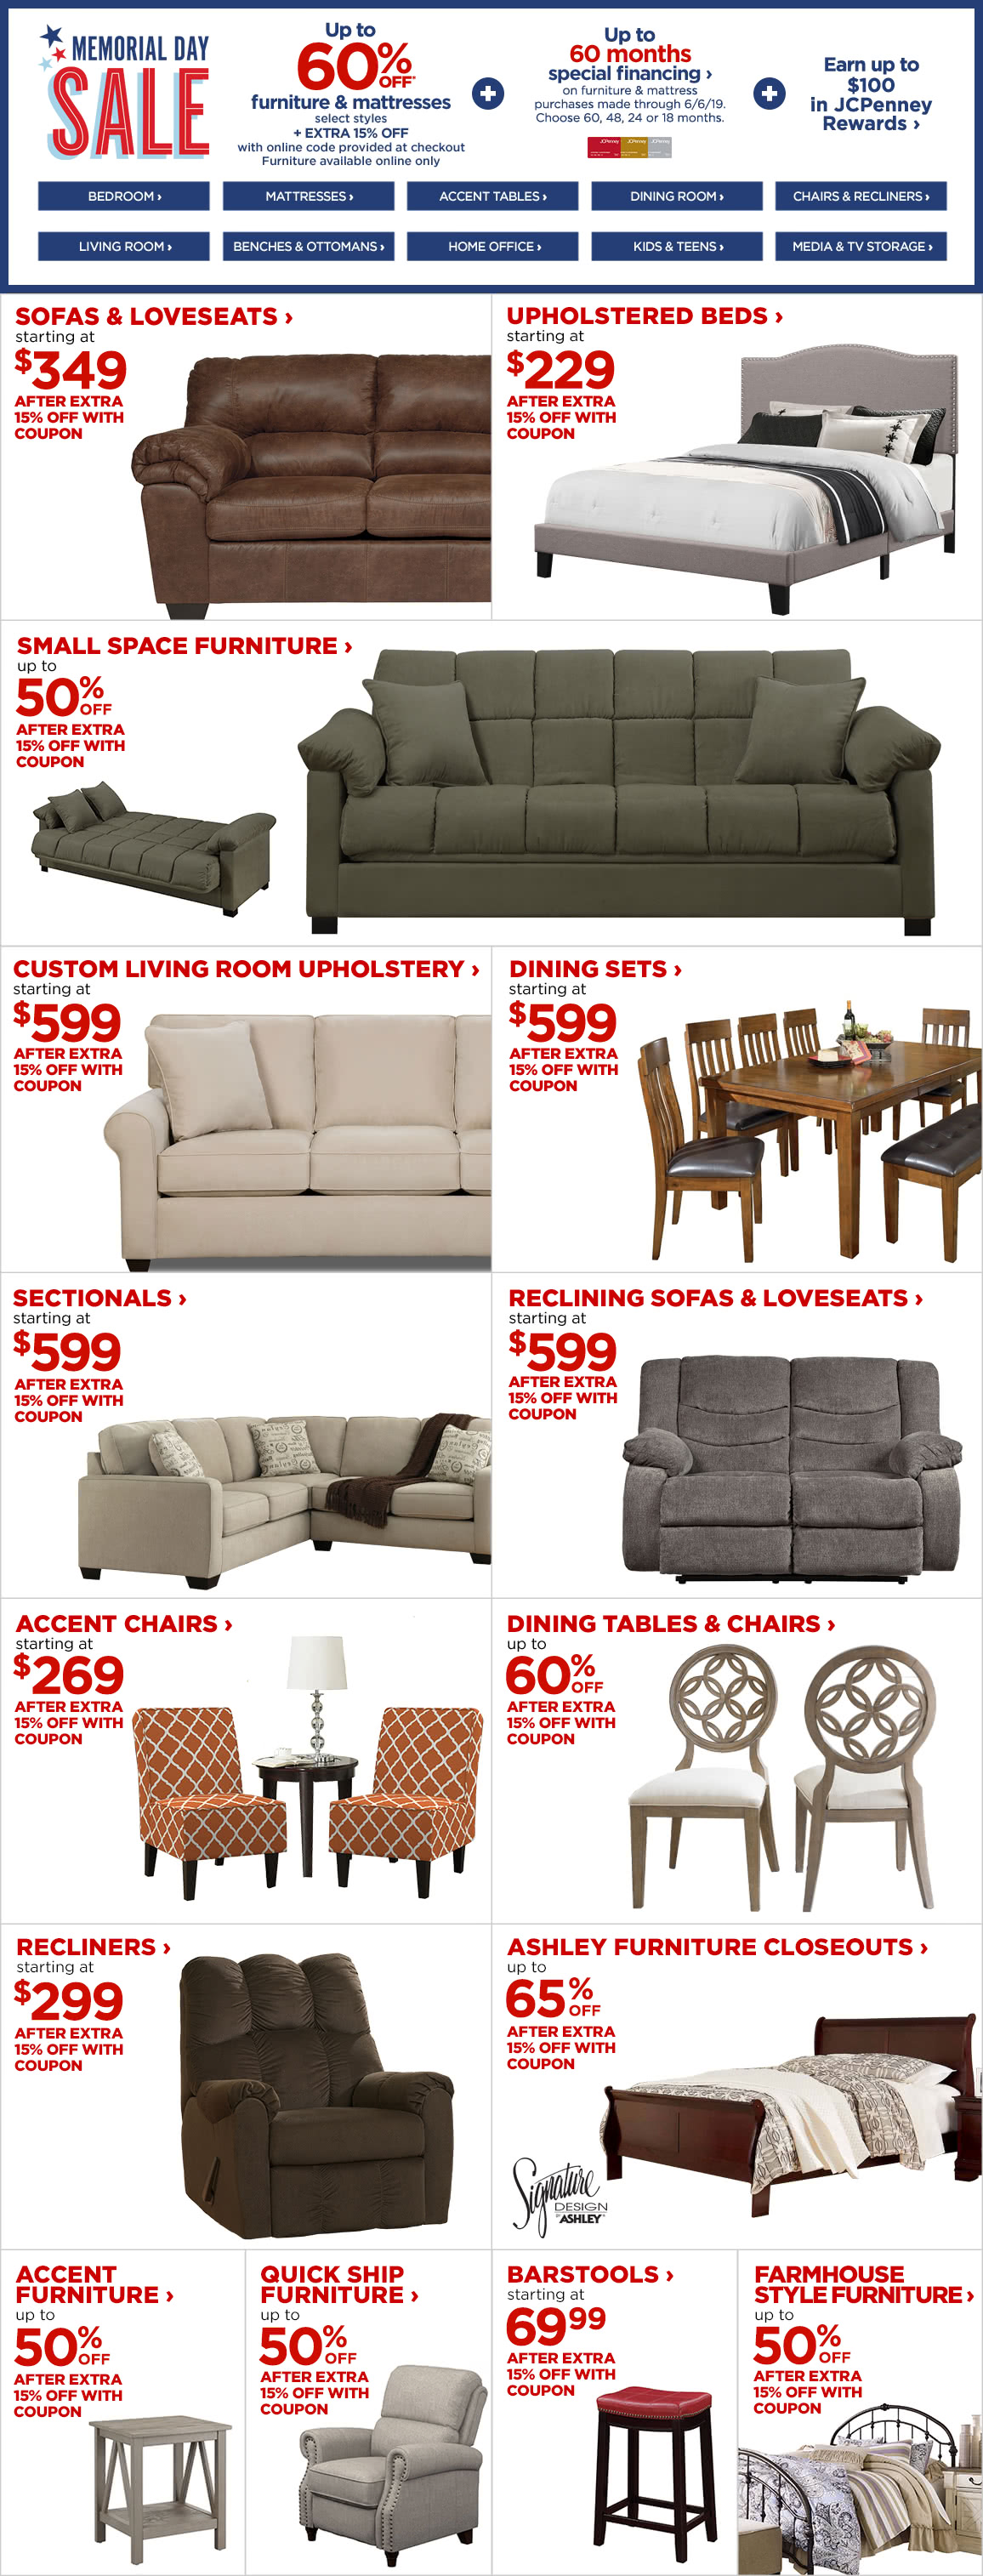 Furniture Store | Home Furniture Memorial Day Sale | JCPenney